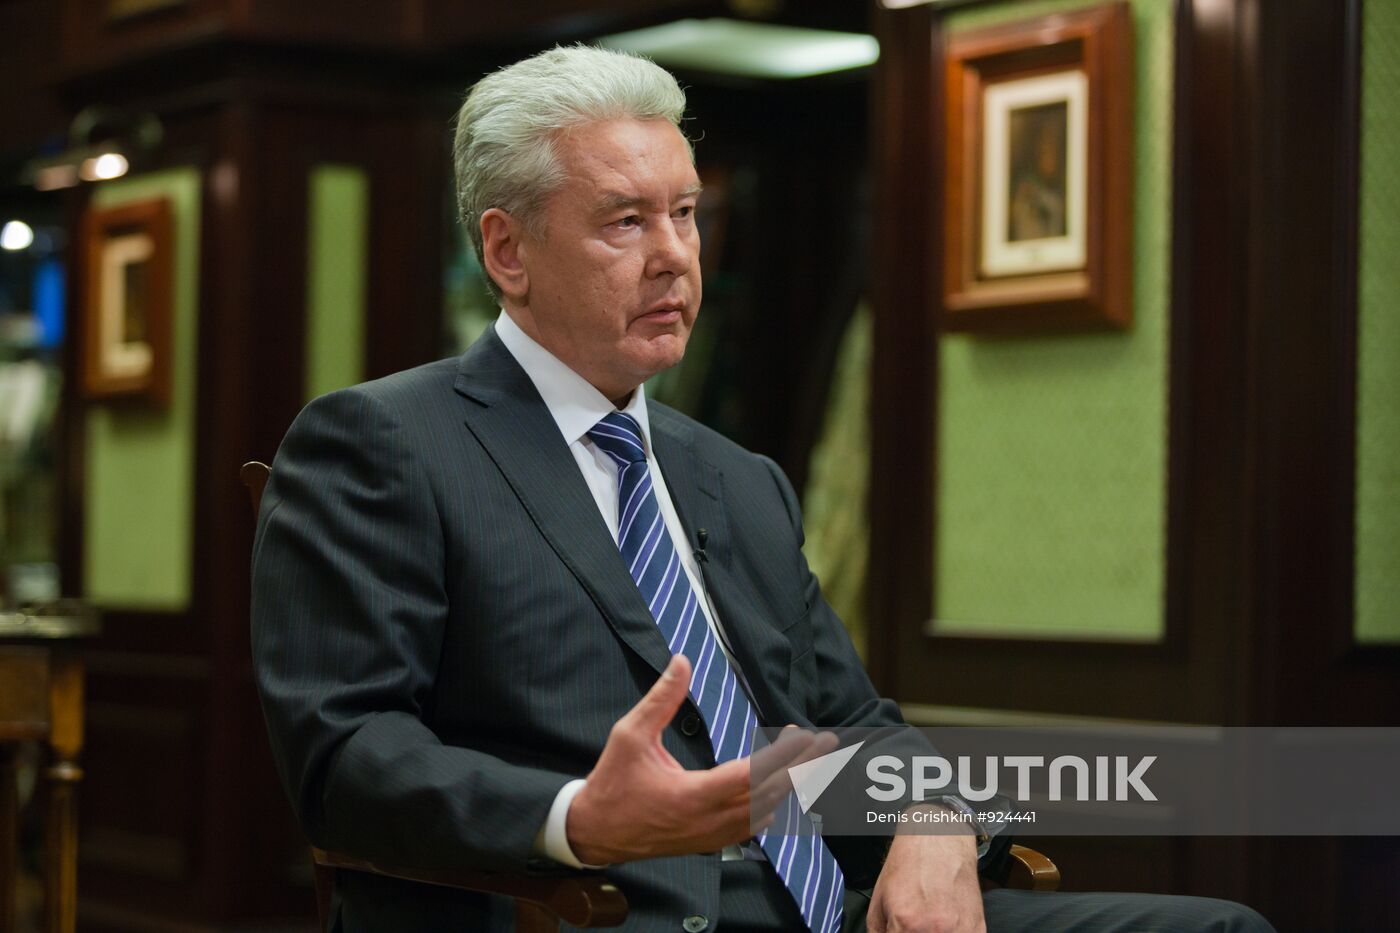 Sergei Sobyanin gives interview to Reuters